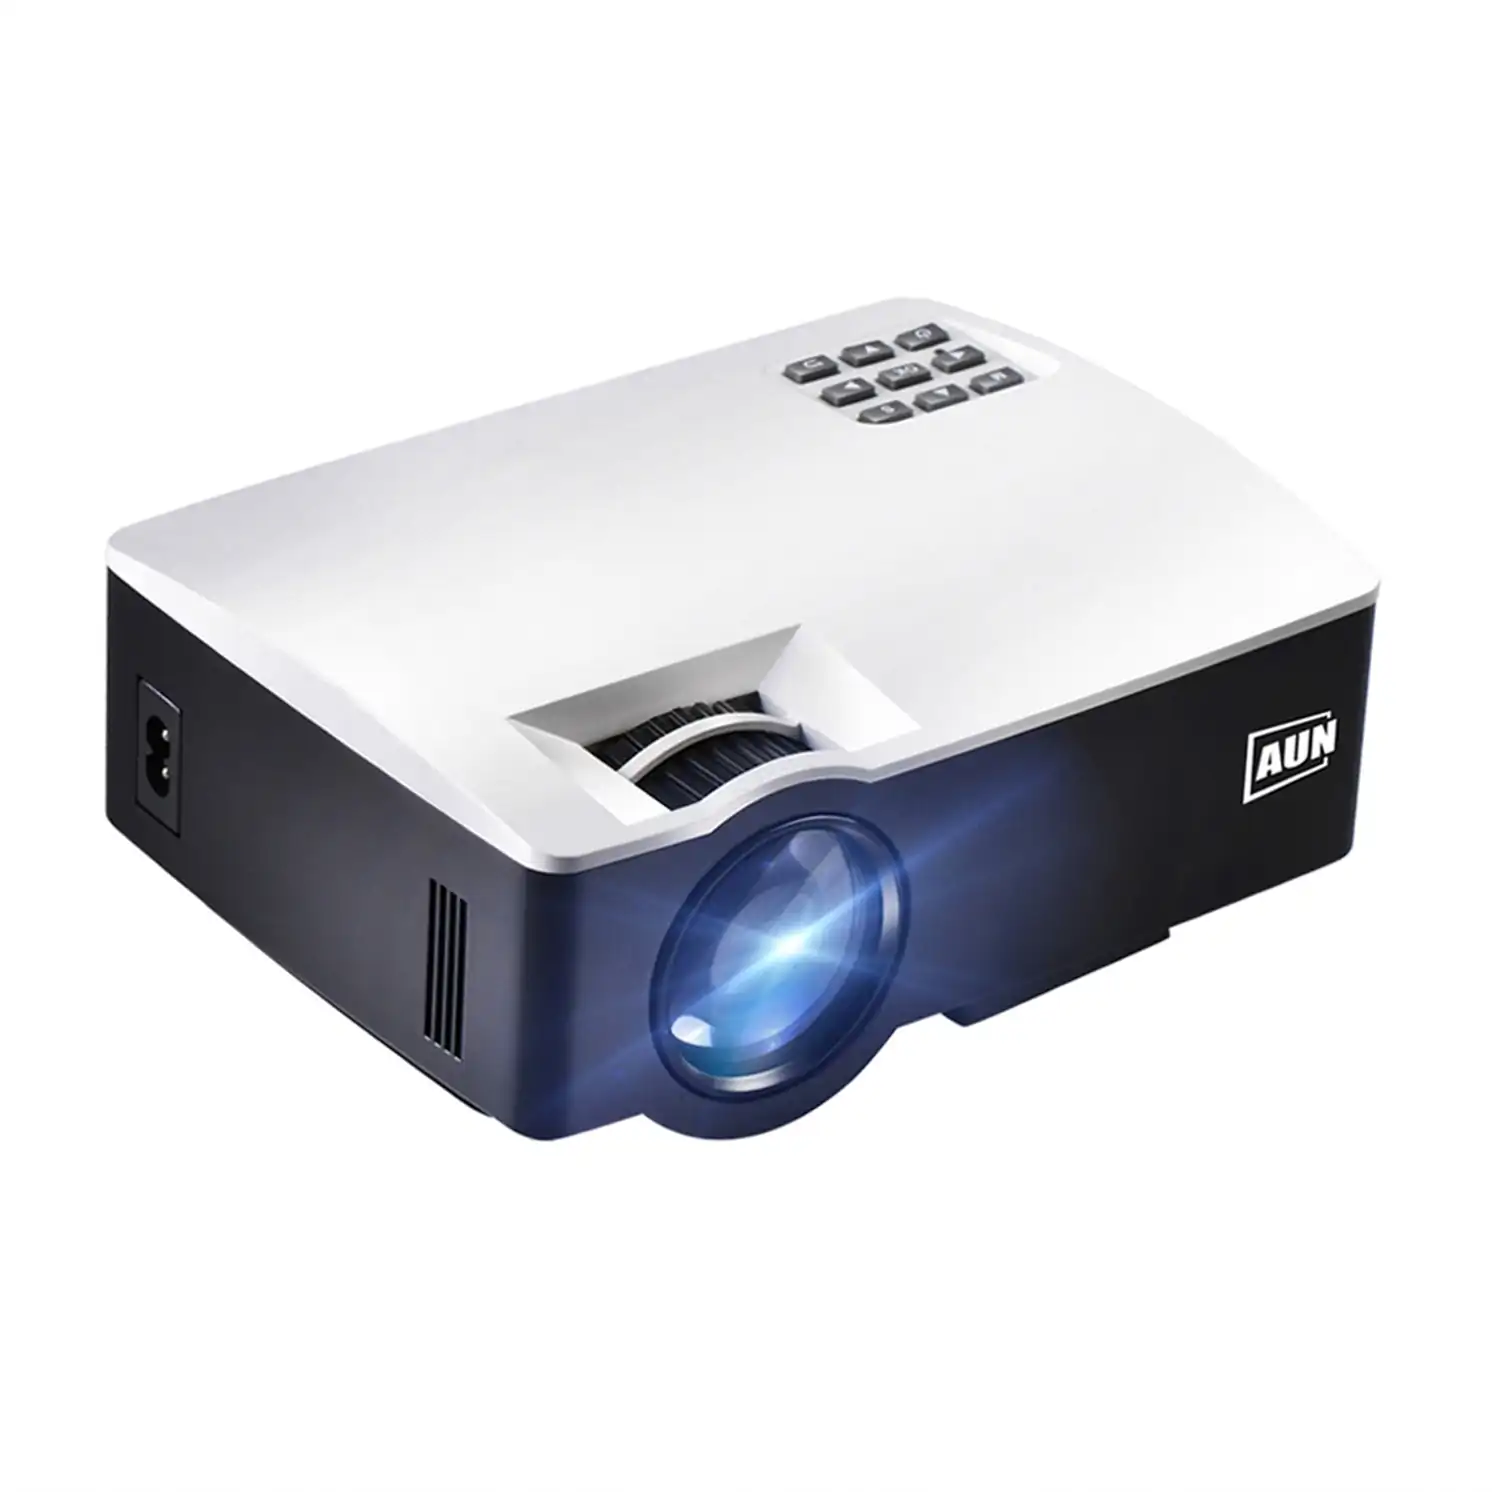 image of Projector AUN AKEY1 for Home Theater, 1800 Lumens, Resolution 800x600dpi, HDMI Support Full HD 1080P